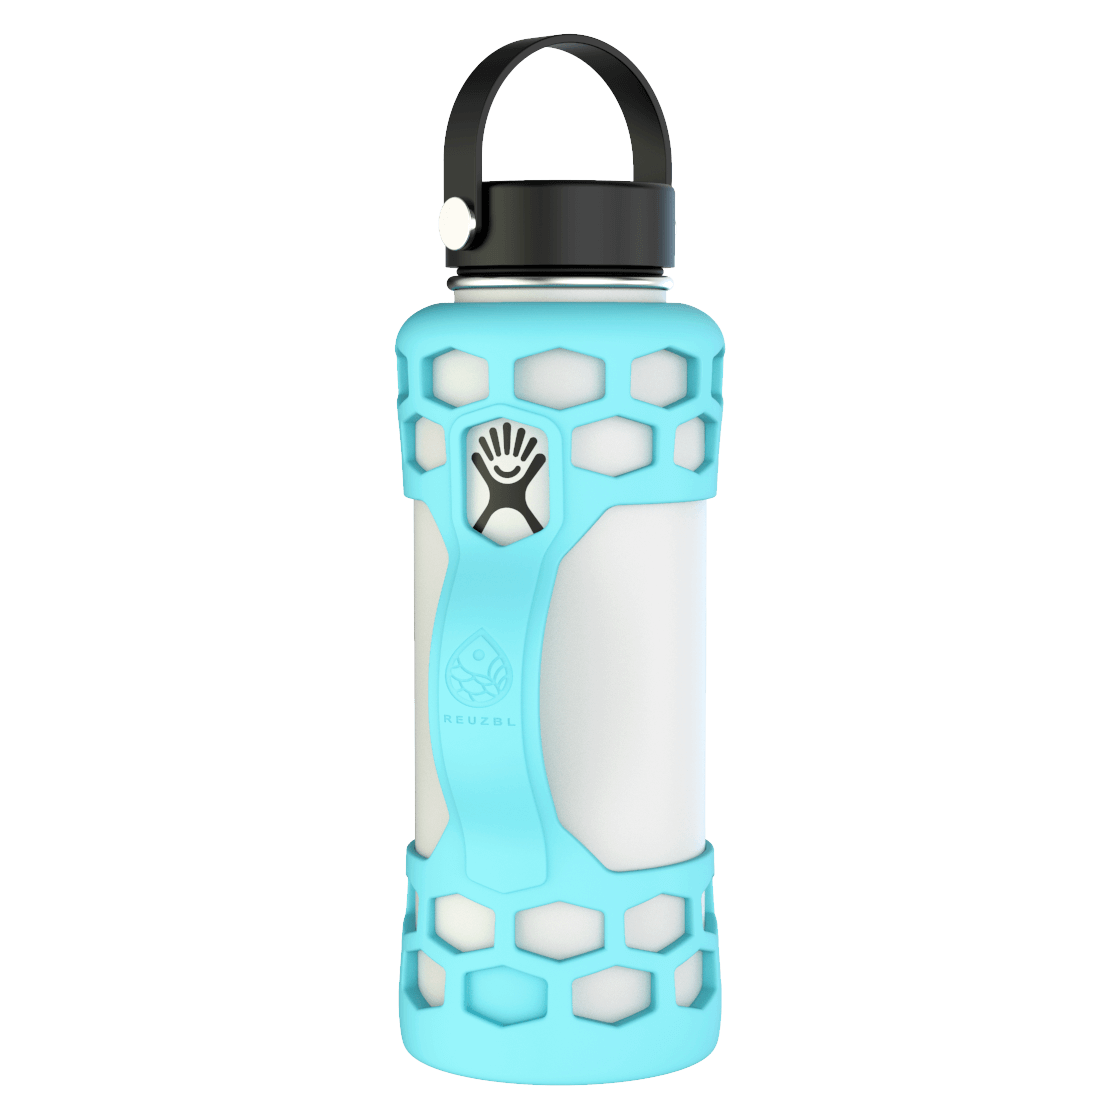 REUZBL Bottle Bumper Silicone Sleeve in White for Hydro Flask